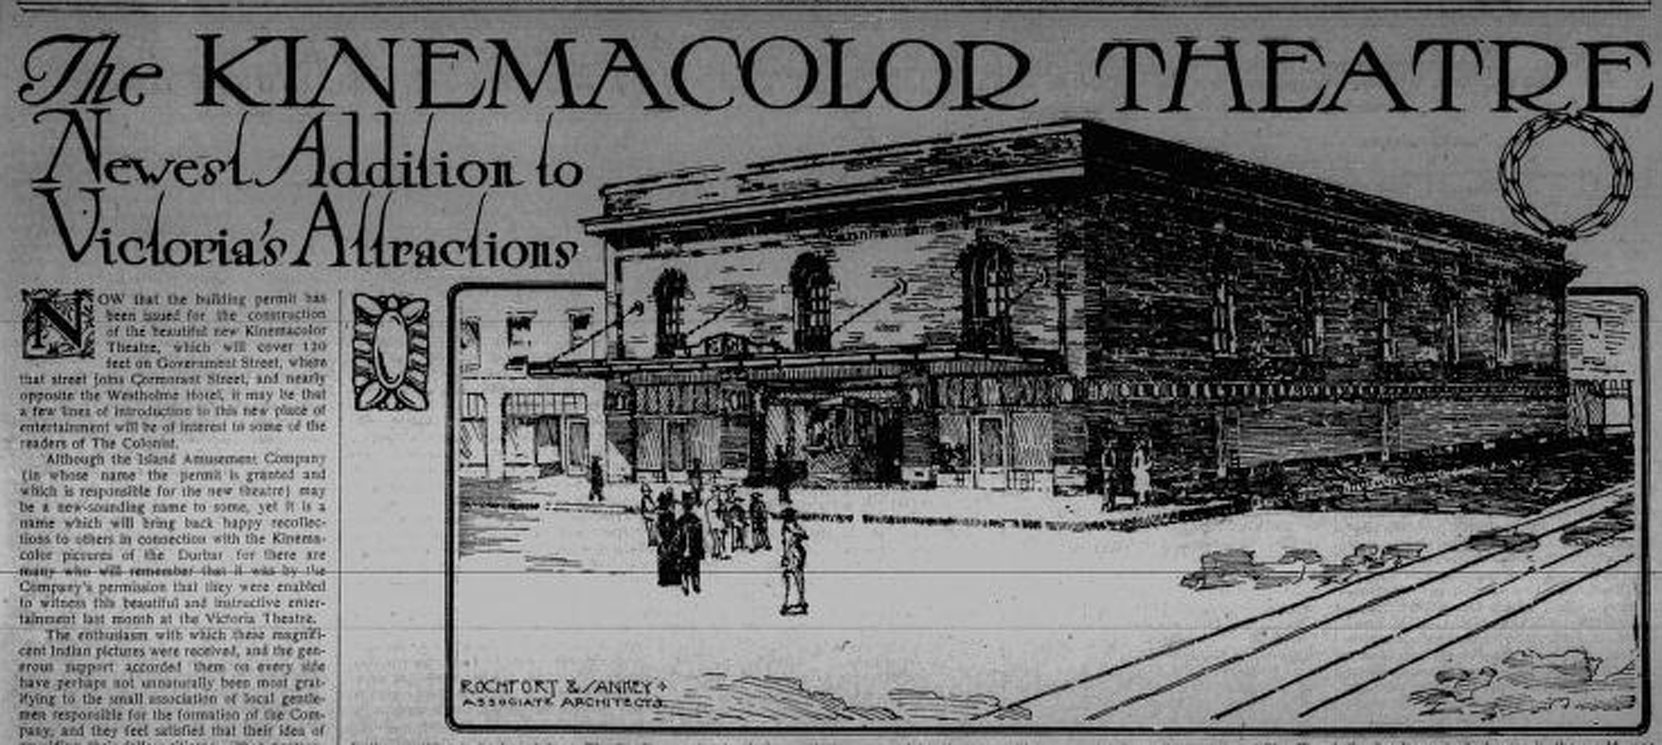 1913 architects' drawing by Rochfort & Sankey of the exterior of the KinemaColor Theatre, 1600 Government Street (Victoria Online Sightseeing Tours collection)